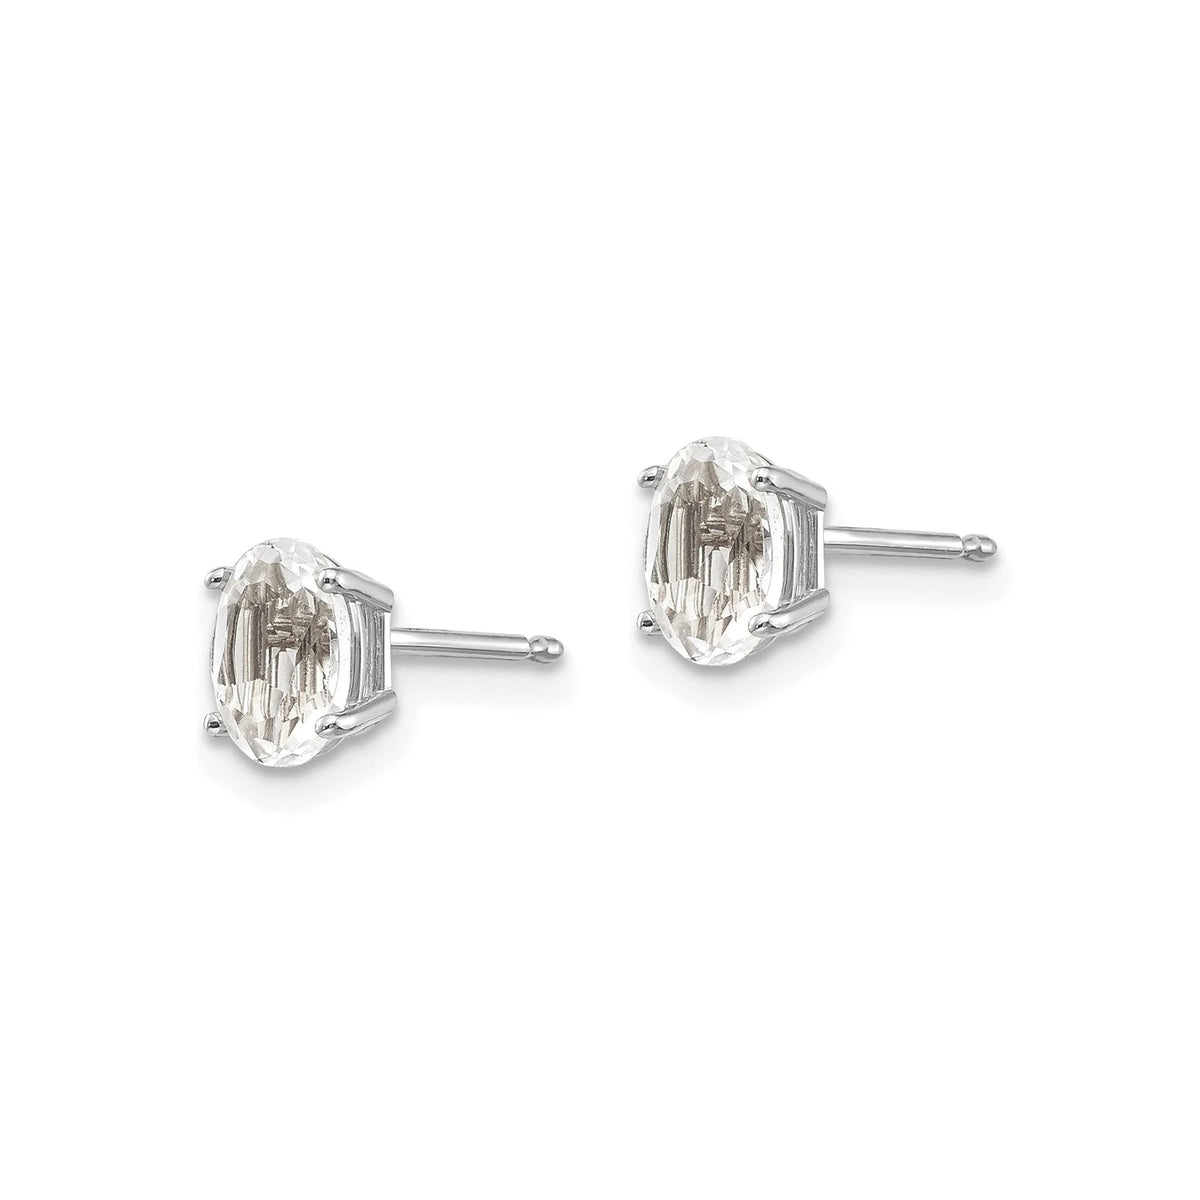 14k Yellow Gold or 14k White Gold 6x4mm Topaz Earrings April Birthstone Studs- Gift Box Included - Ships Next Business Day